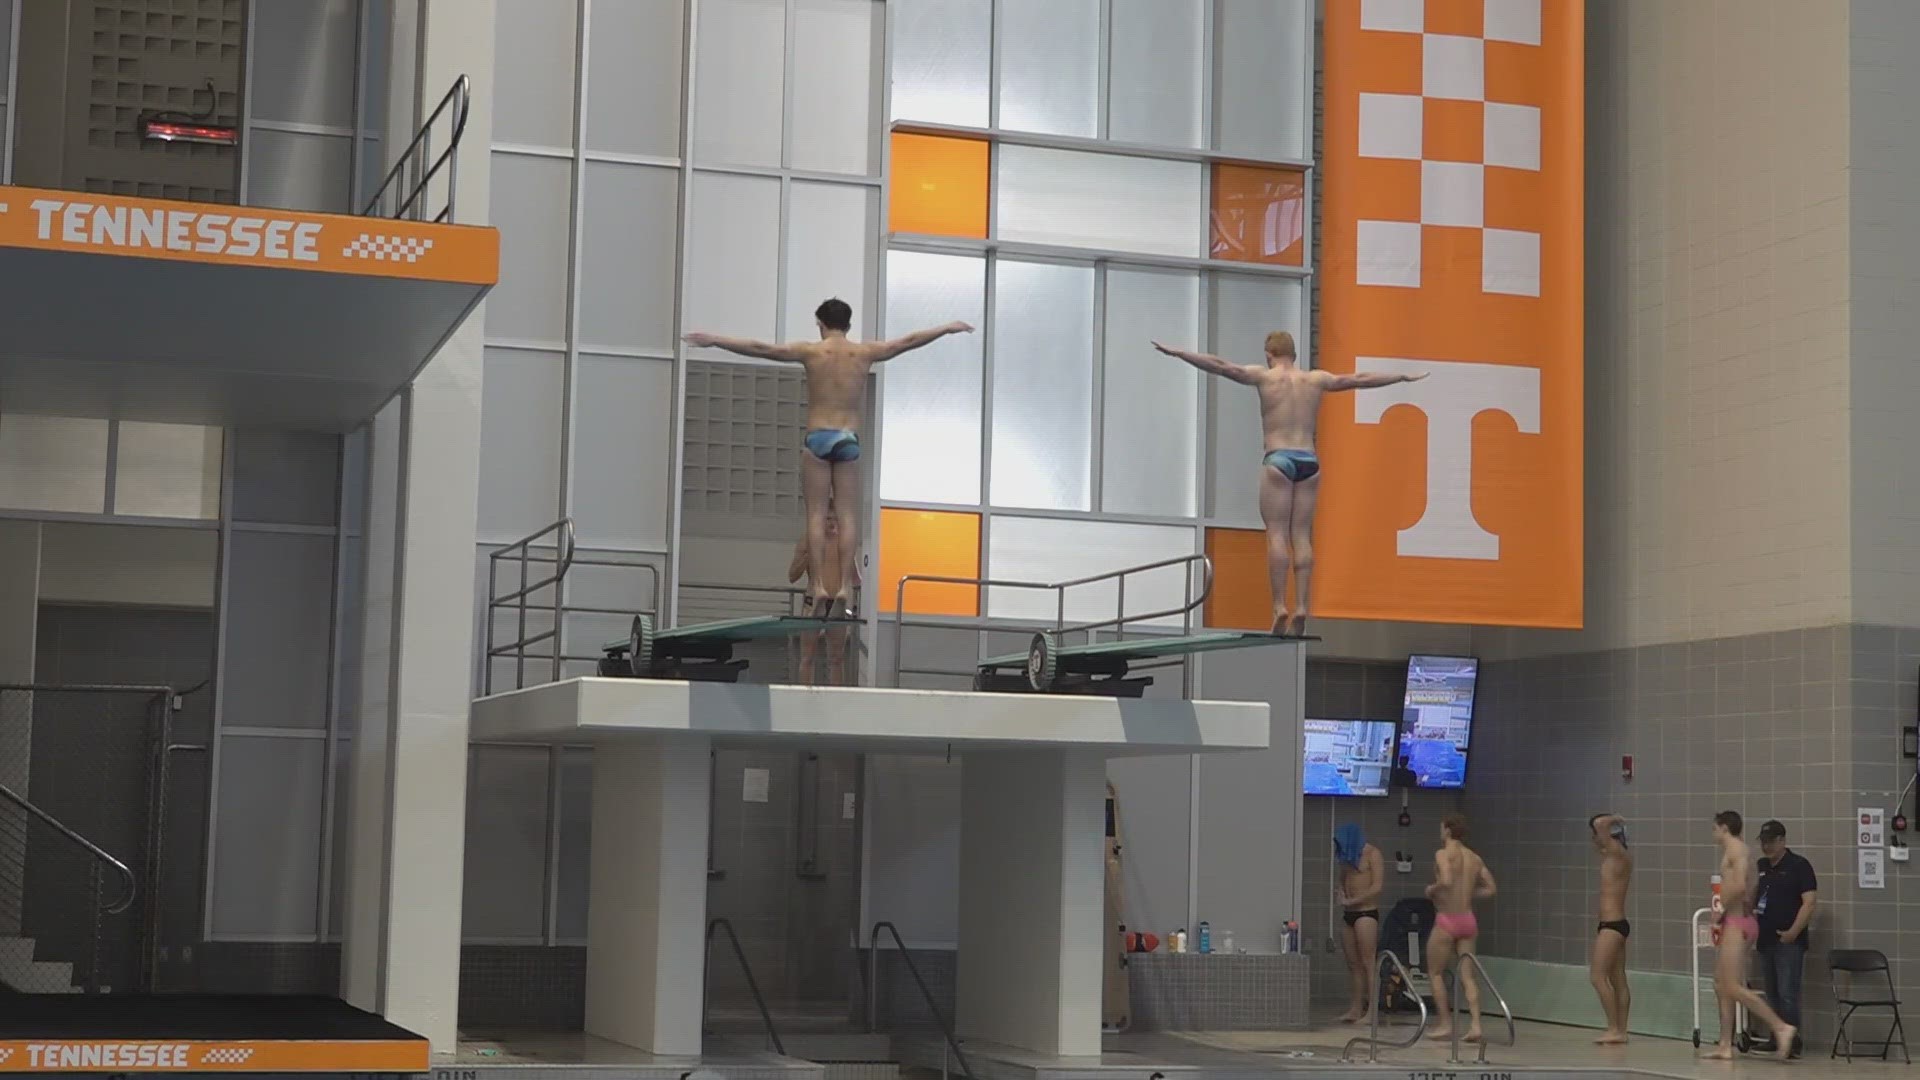 Divers from across the country are competing to try to earn spots in the Olympic qualifiers this summer and the World championships.